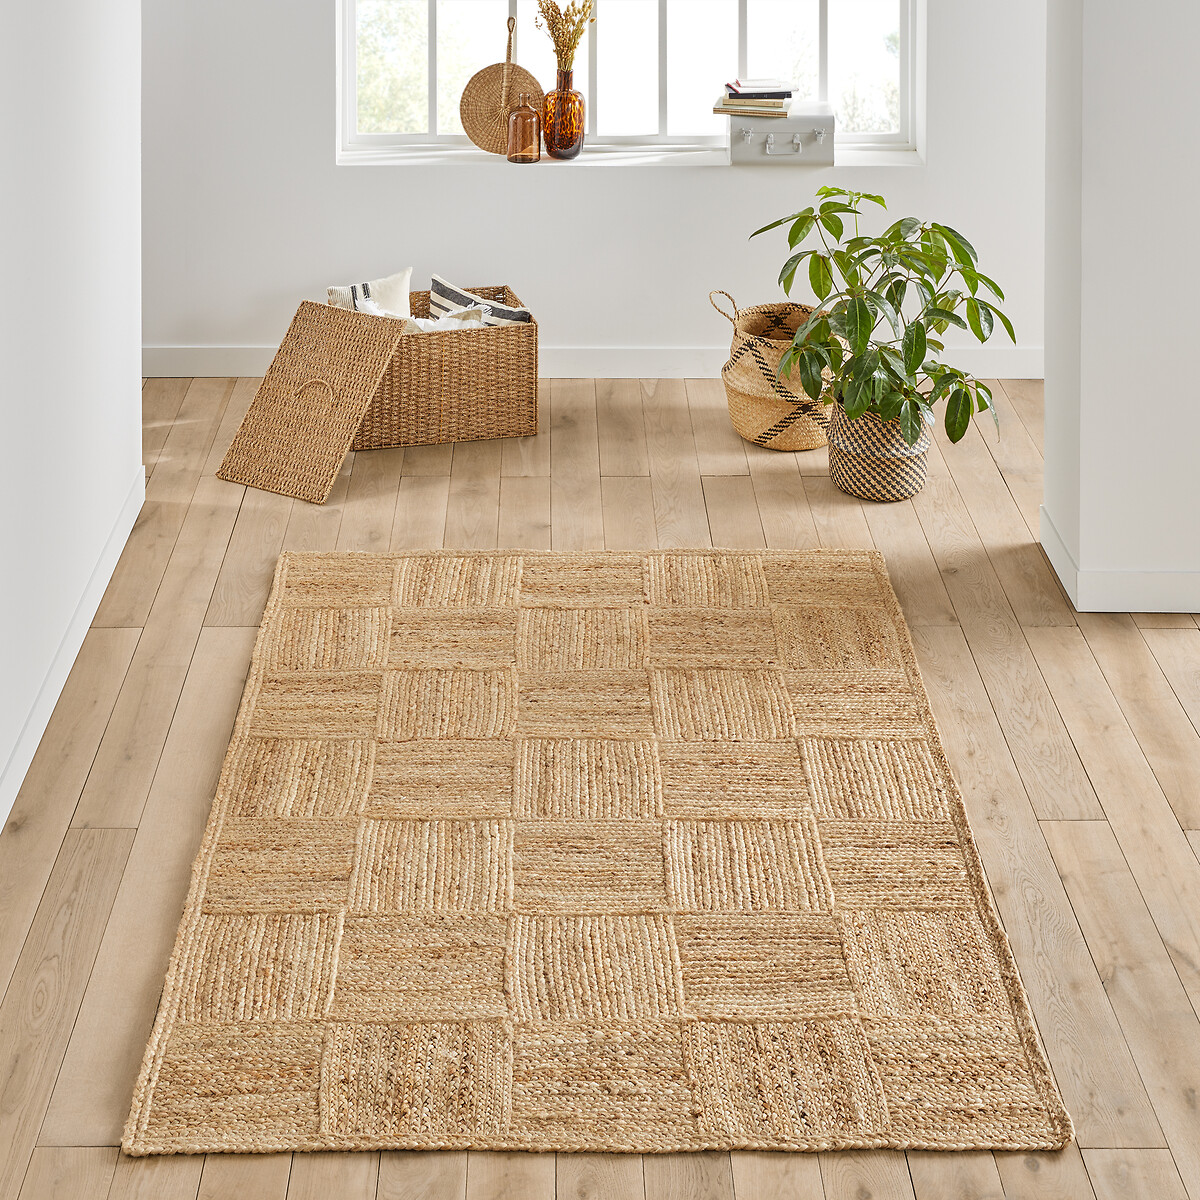 Sorry but these jute rugs are just so chic